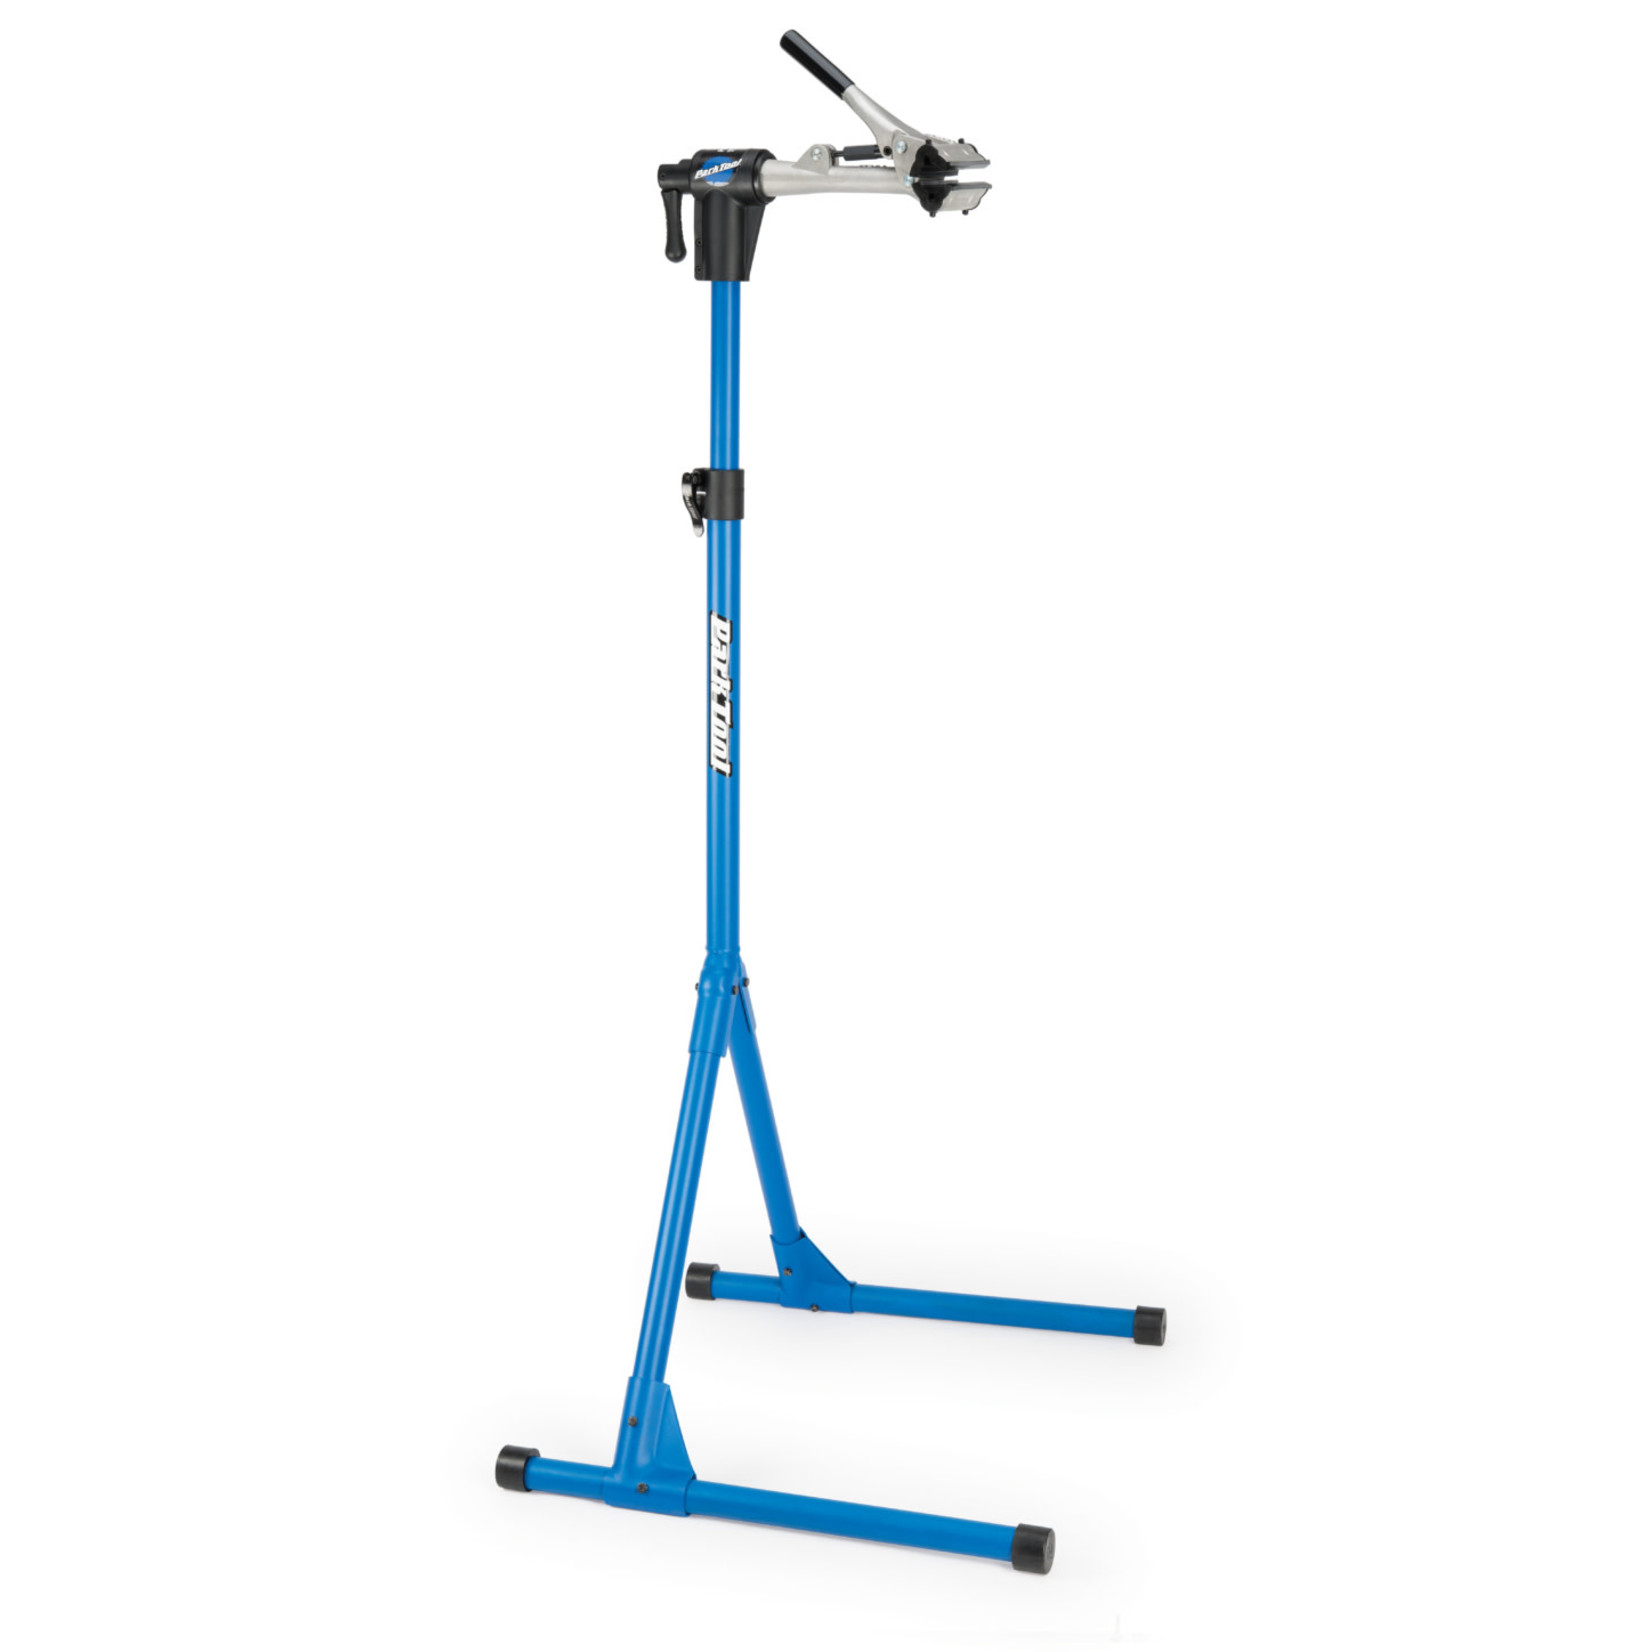 PARK TOOL PCS-4-1, Deluxe home mechanic repair stand with 100-5C clamp